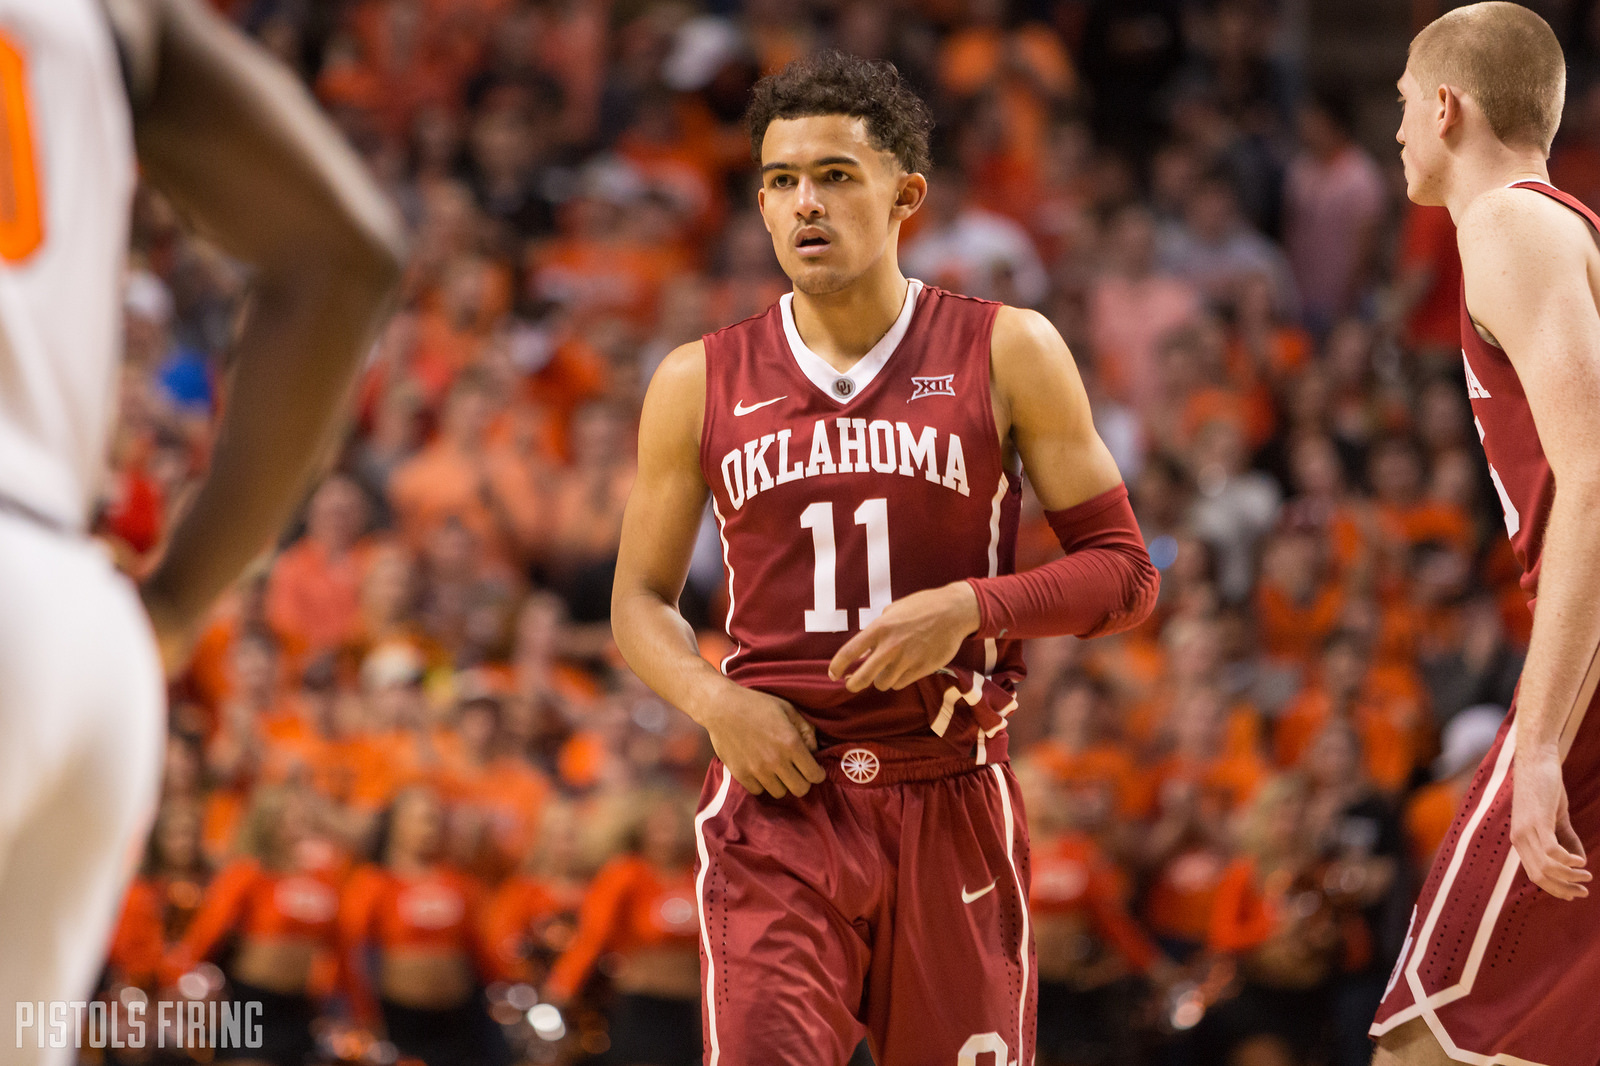 Trae Young Drafted 5th Overall In The 2018 NBA Draft But Traded To The Atlanta Hawks